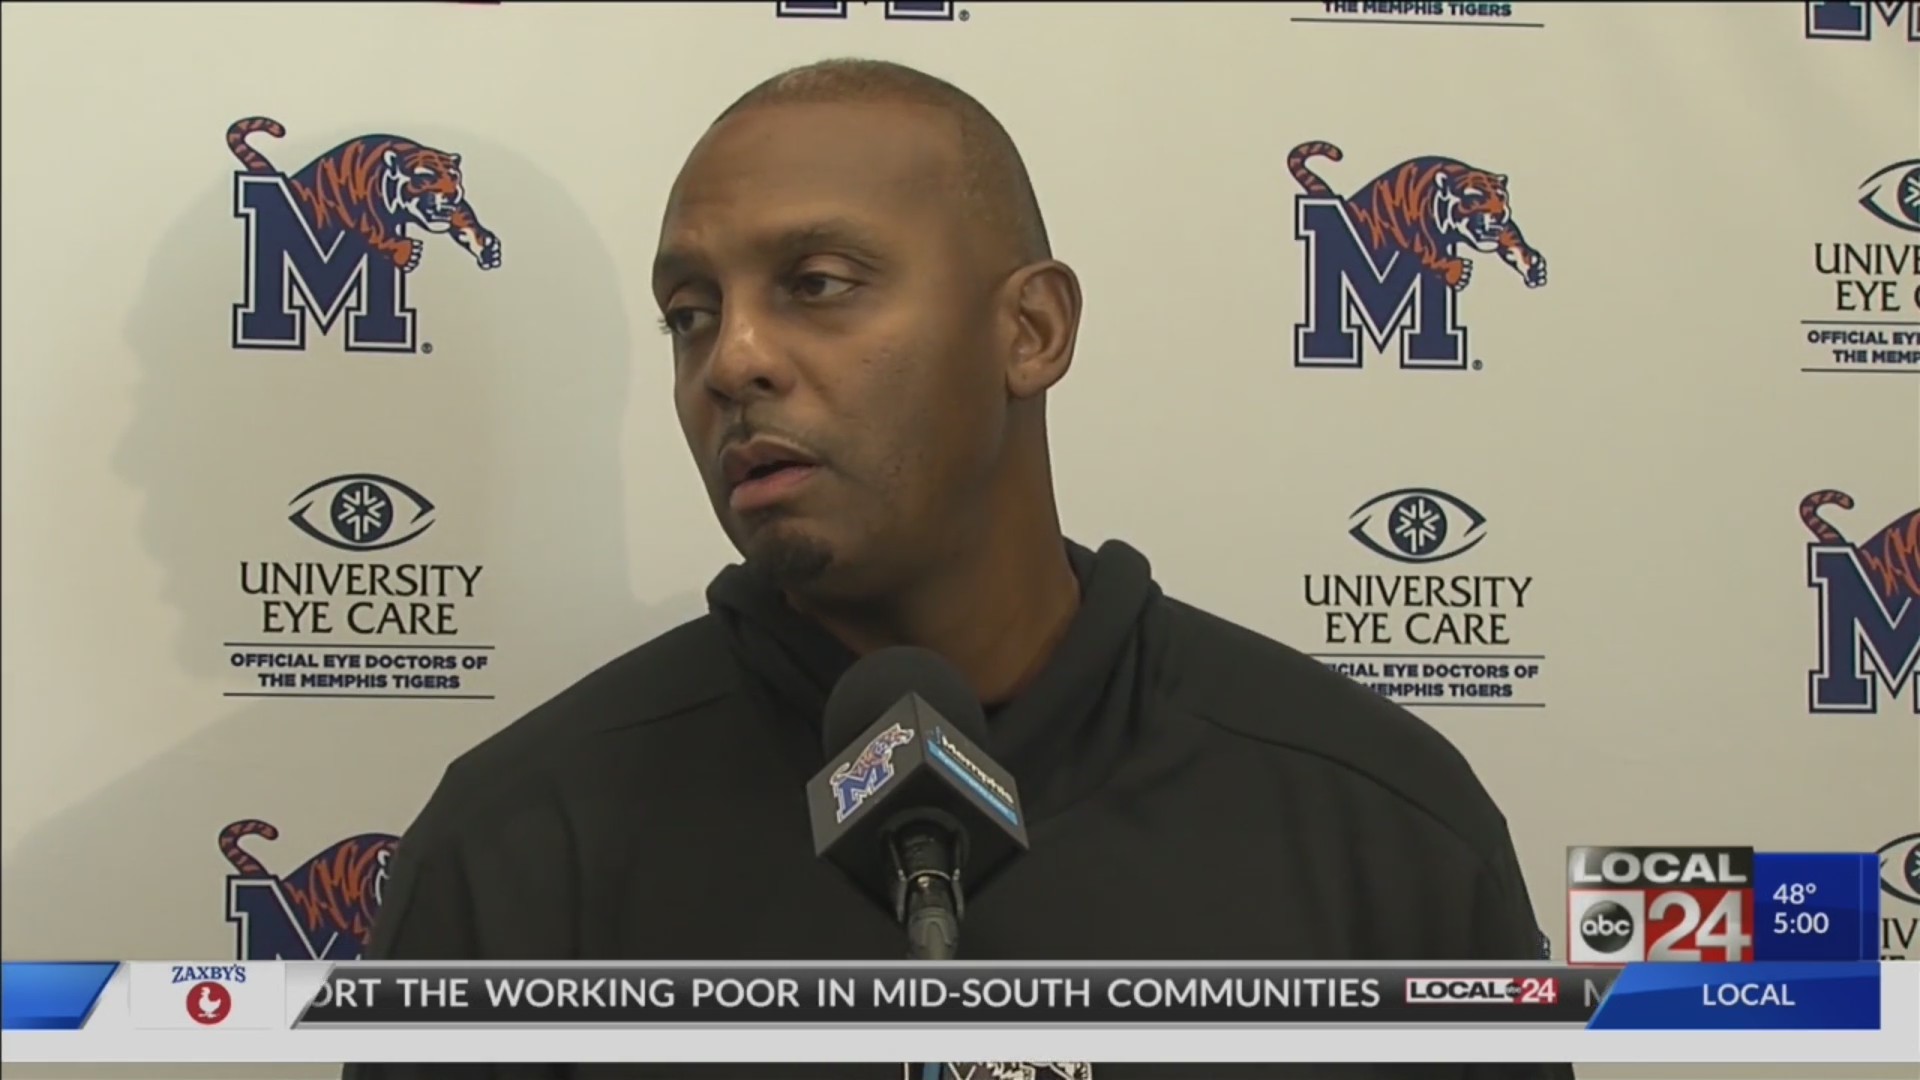 Penny Hardaway speaks publicly for first time since Wiseman withdrew lawsuit against NCAA